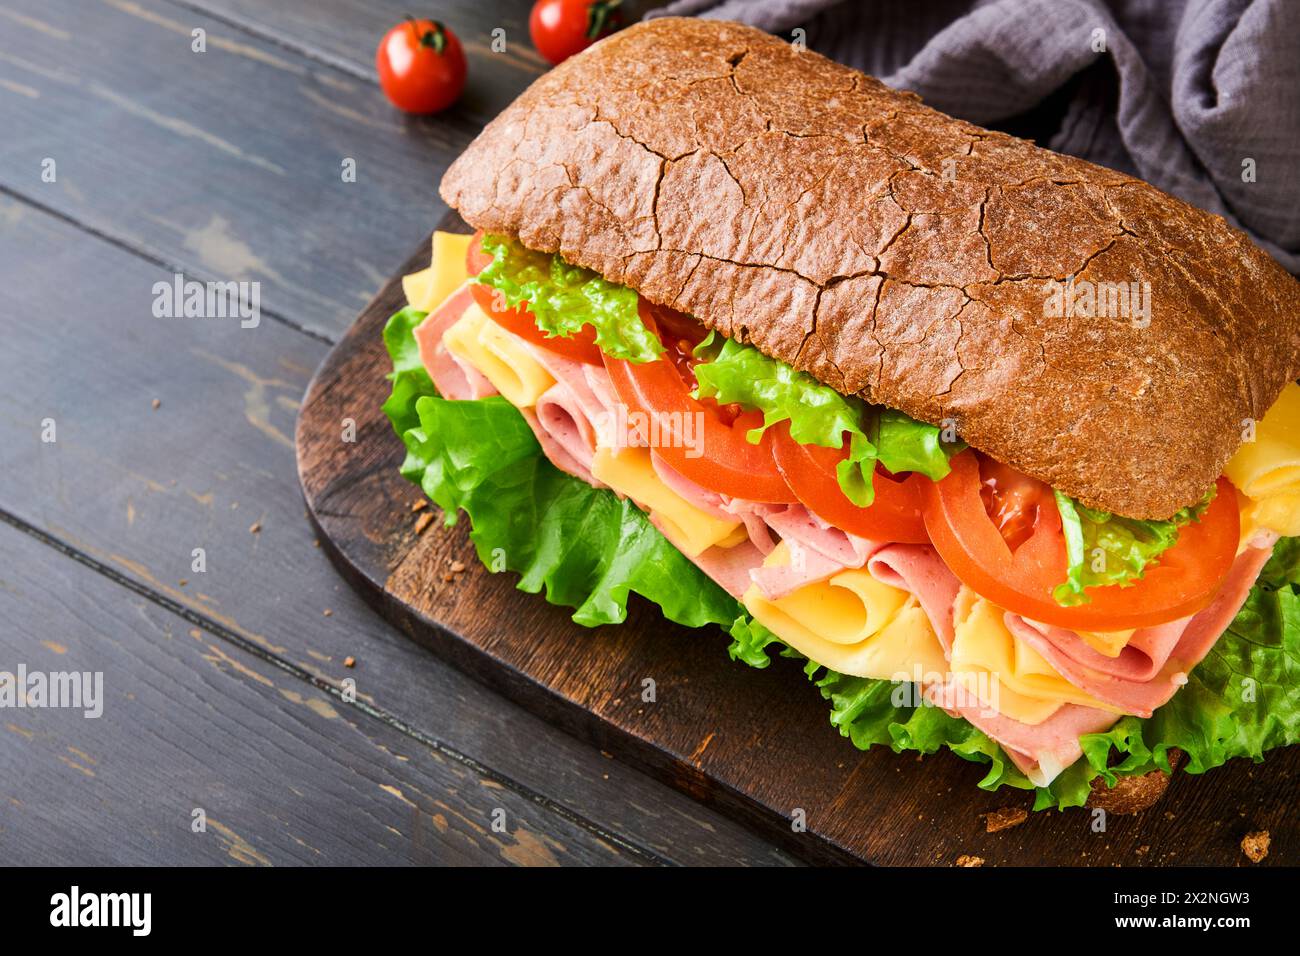 Sandwich. One fresh big submarine sandwich with ham, cheese, lettuce, tomatoes and microgreens on old wooden dark background. Healthy breakfast theme Stock Photo